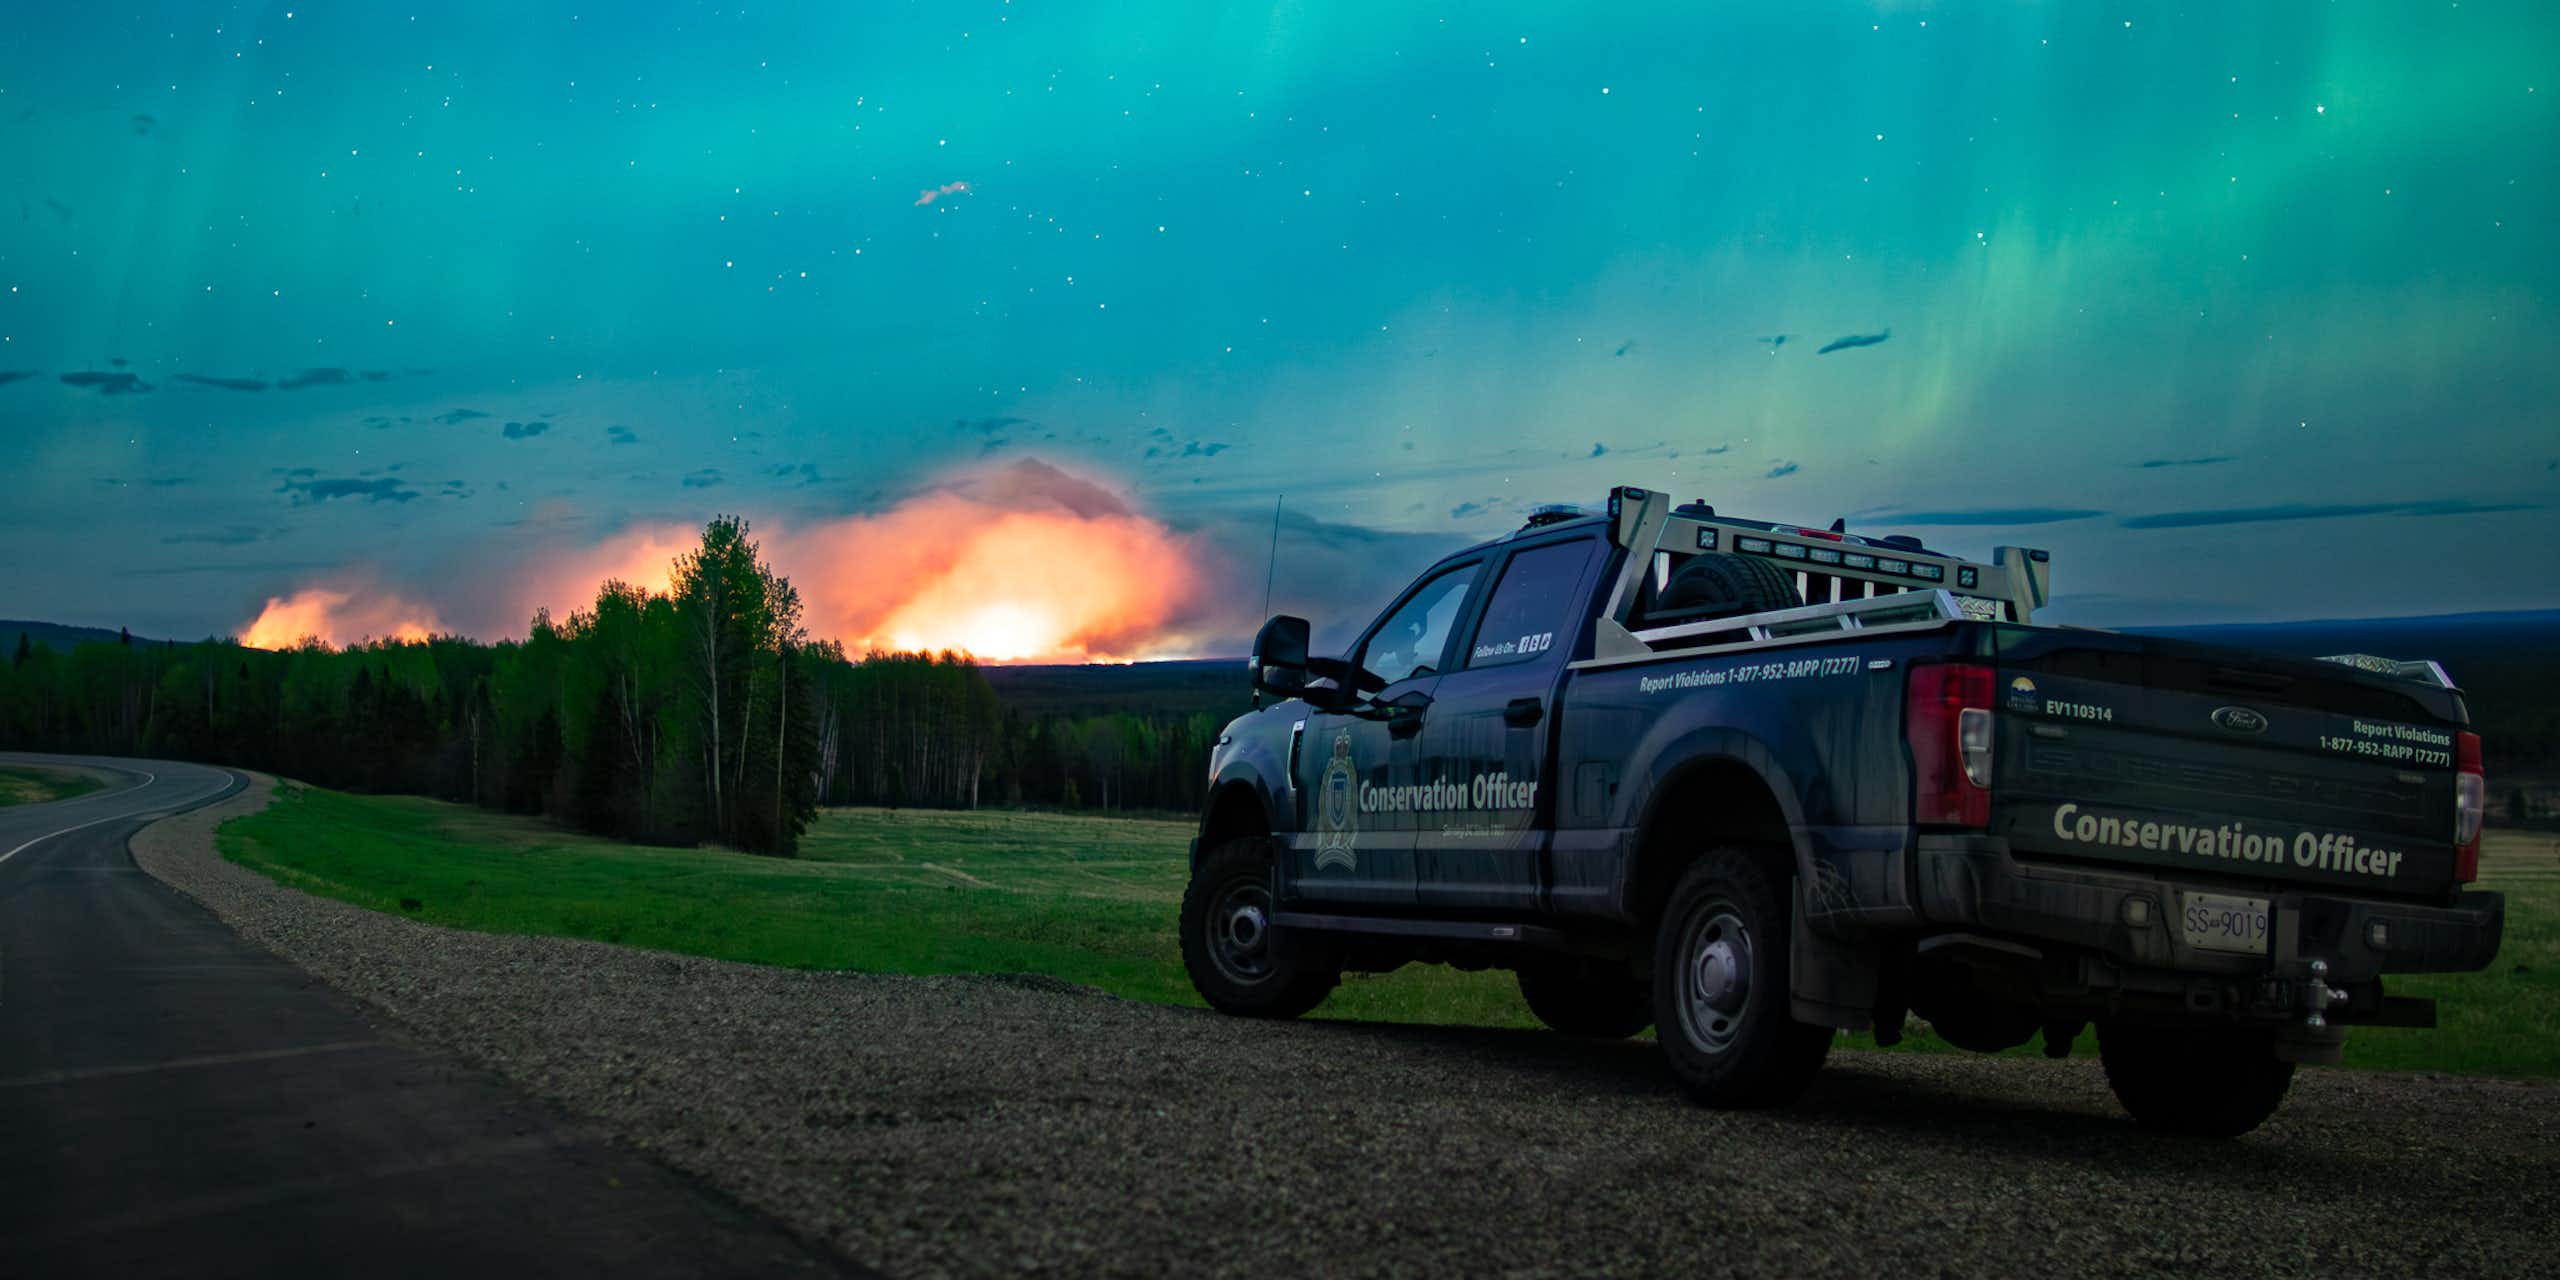 A truck is parked with a fire in the distance under an aurora filled night sky.